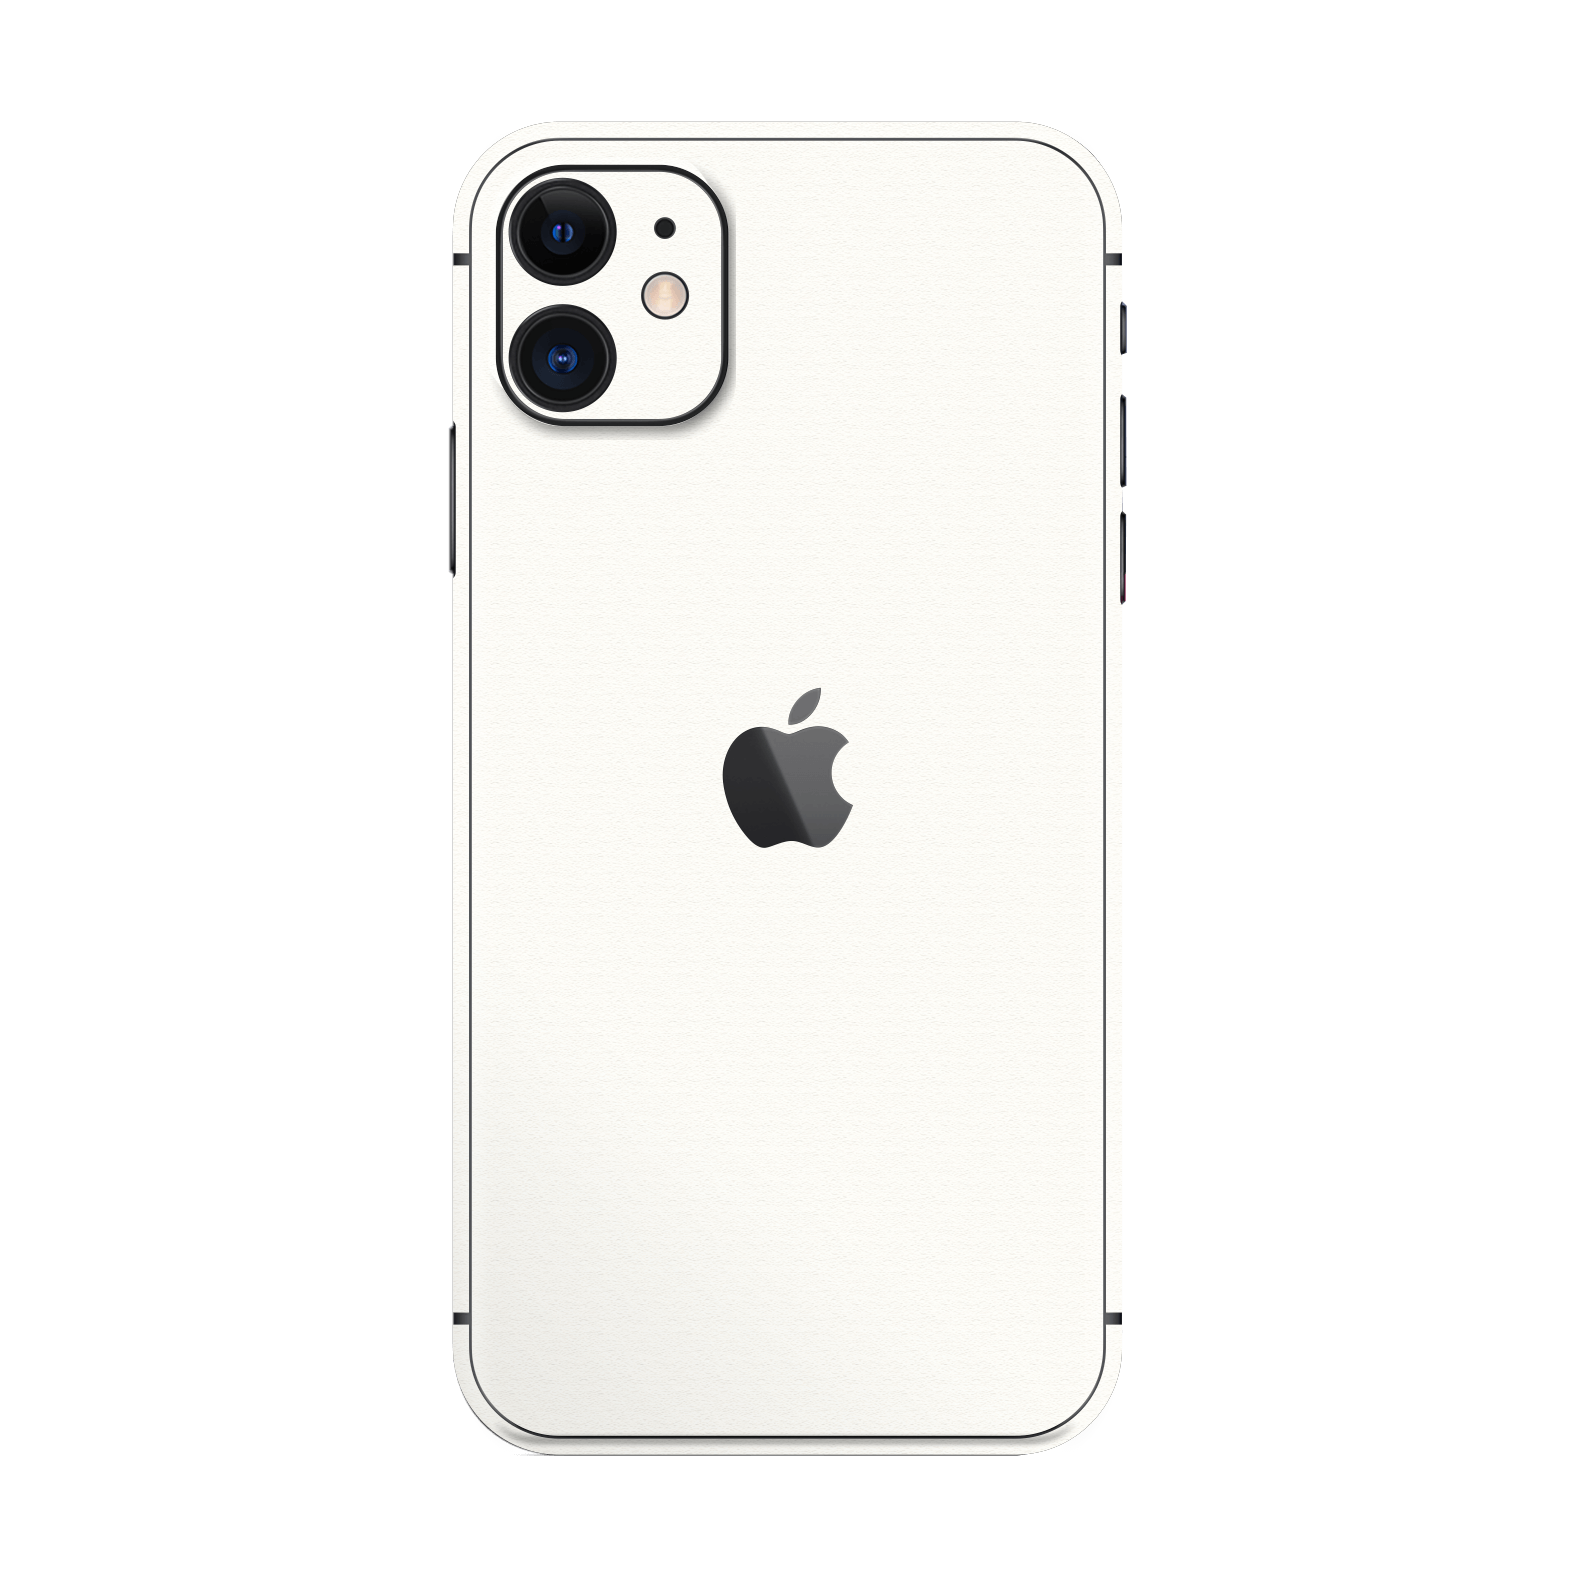 iPhone 11 Luxuria Daisy White Matt 3D Textured Skin Wrap Sticker Decal Cover Protector by EasySkinz